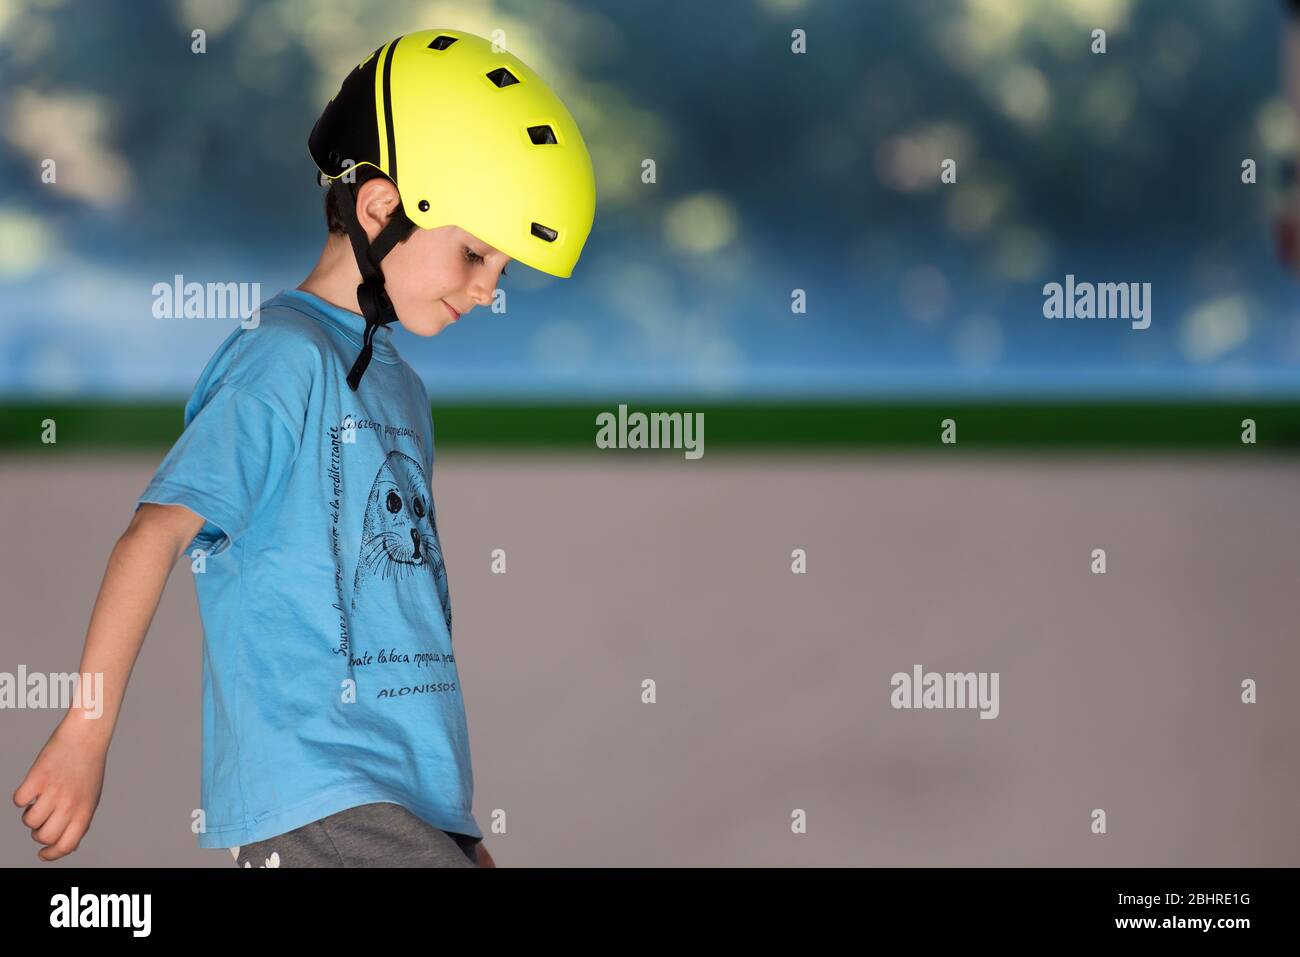 Caucasian boy with yellow helmet. Safety concept image. Stock Photo